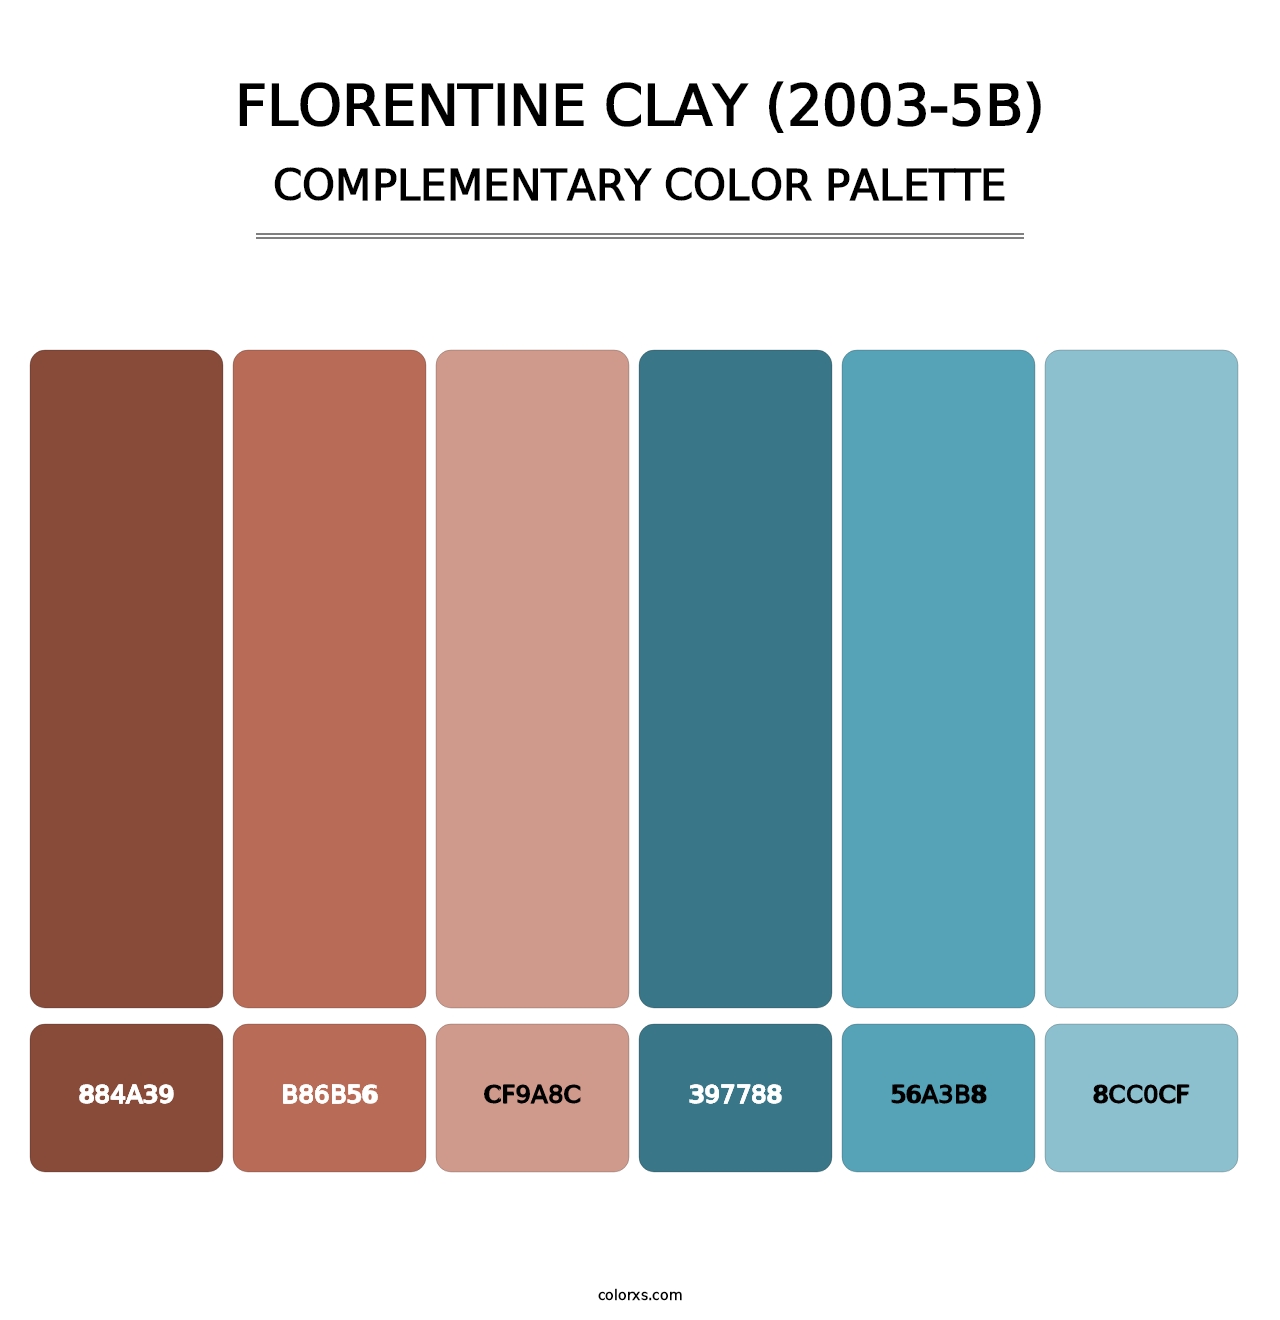 Florentine Clay (2003-5B) - Complementary Color Palette